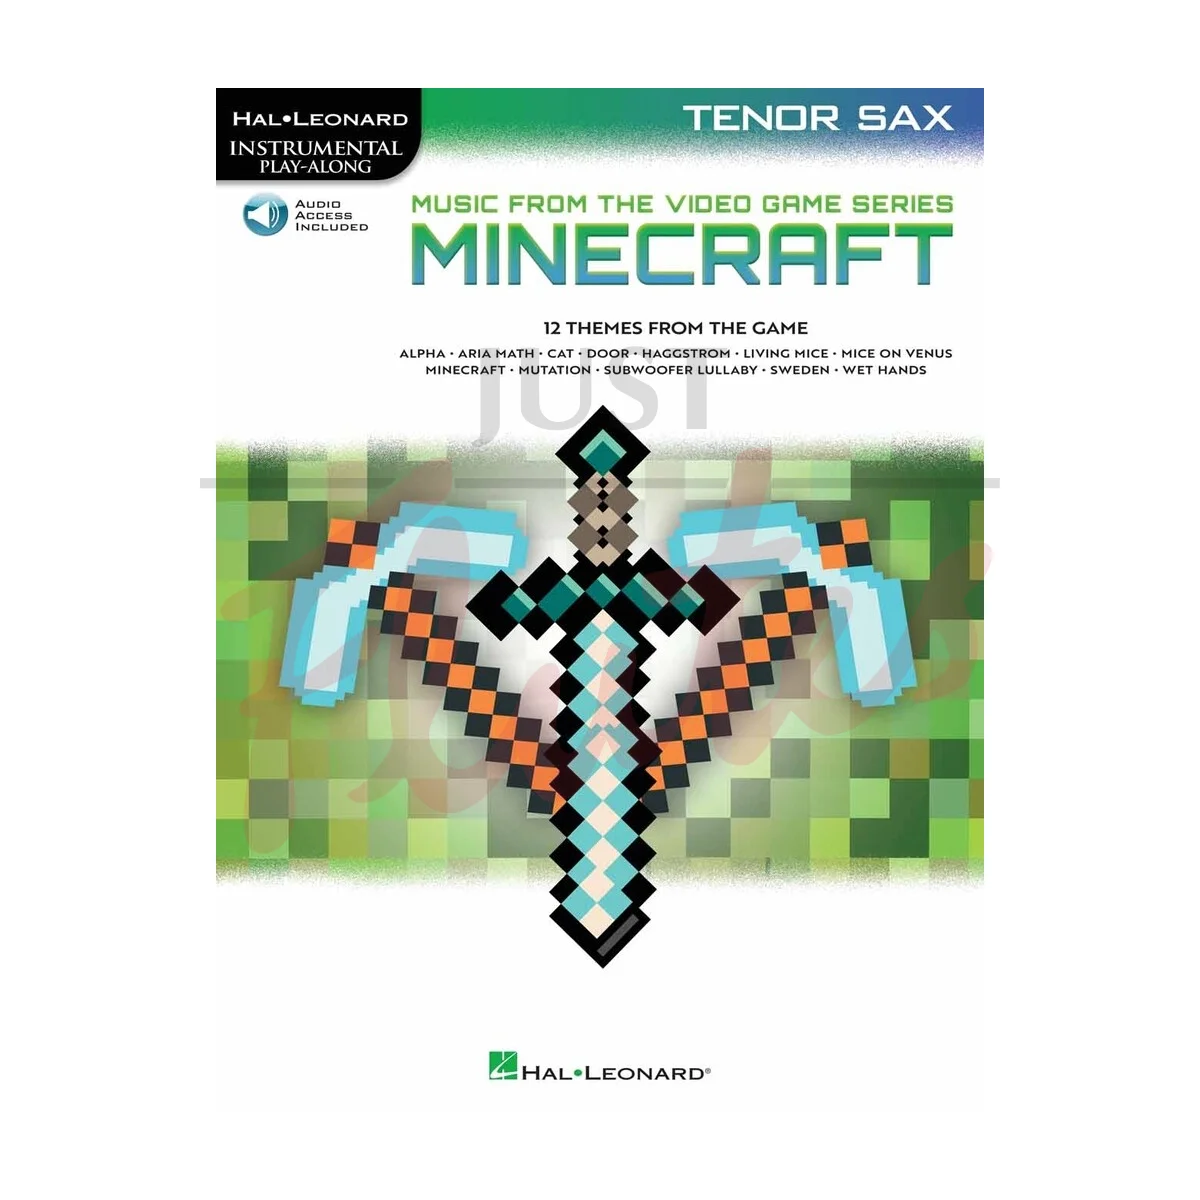 Music from the Video Game Series Minecraft for Tenor Saxophone